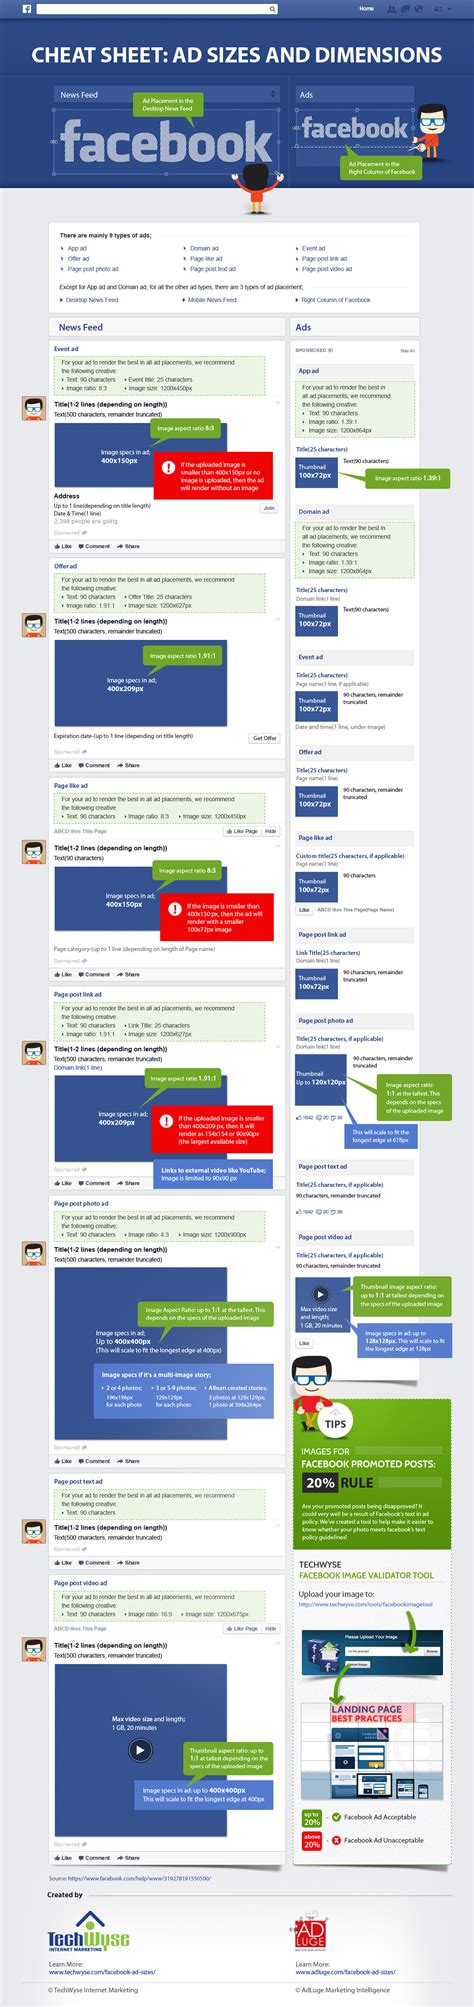 facebook ad specifications  dimensions infographic adluge